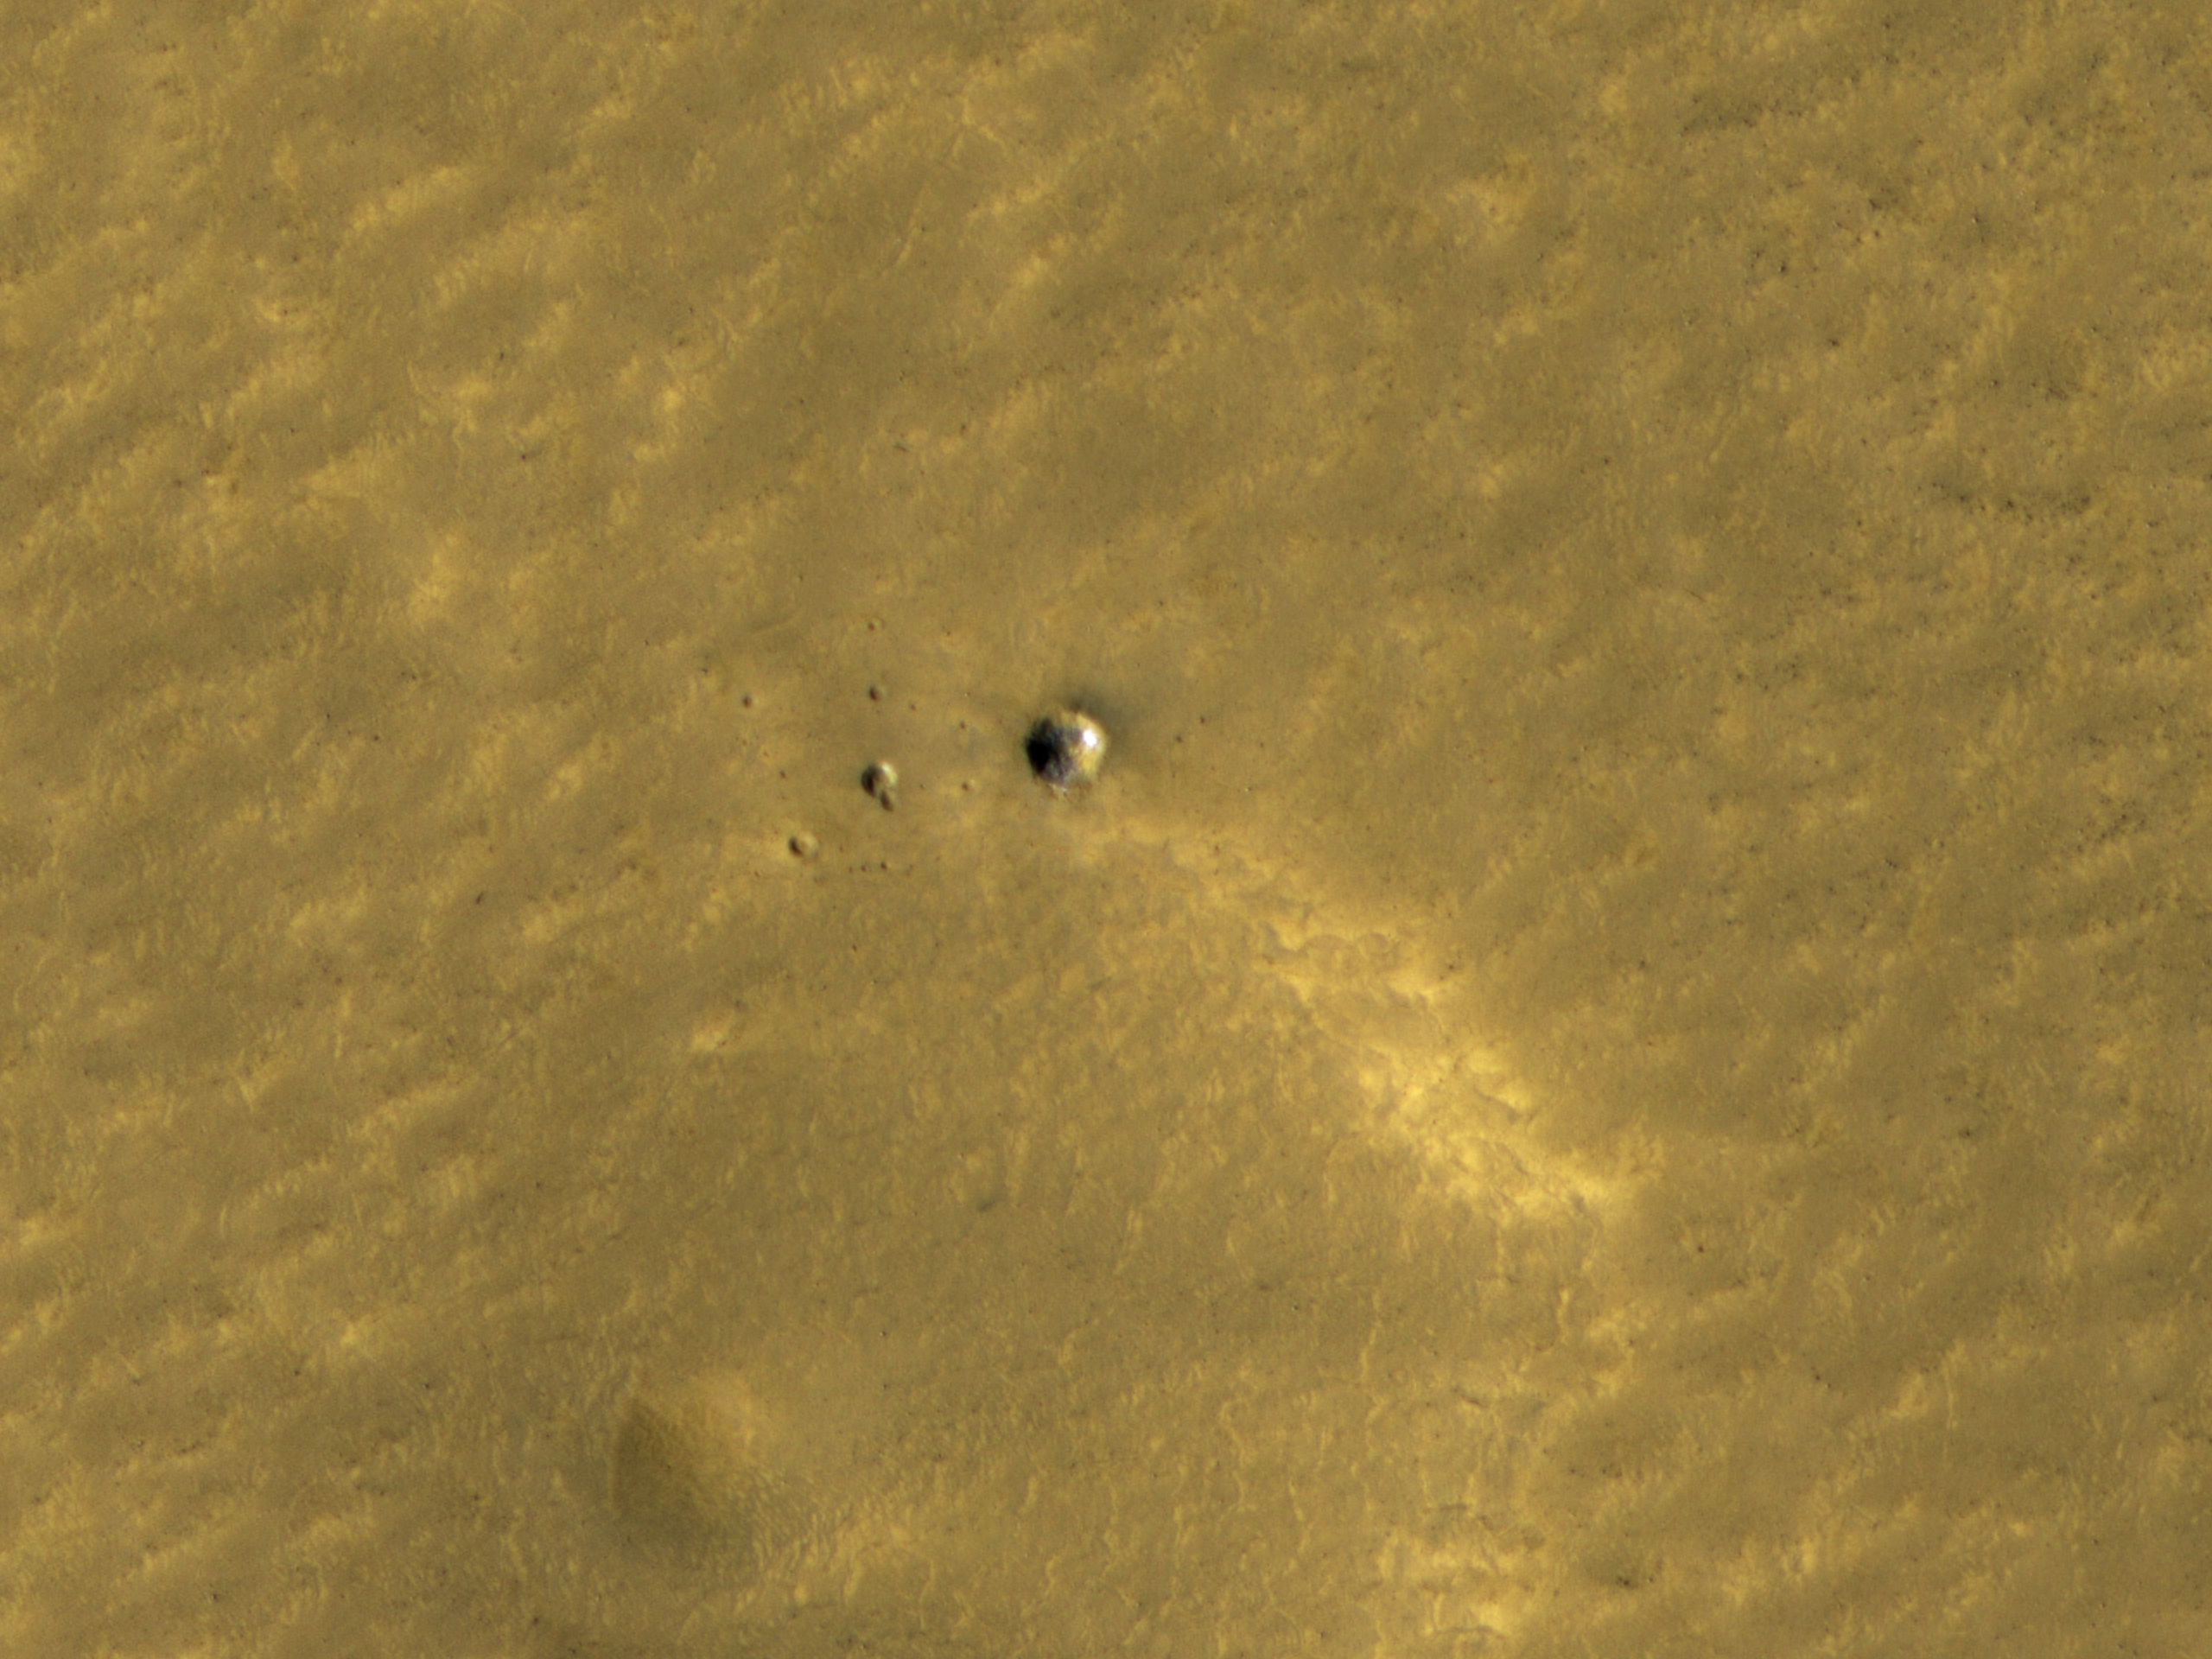 Long-lasting Ice in a Young Crater